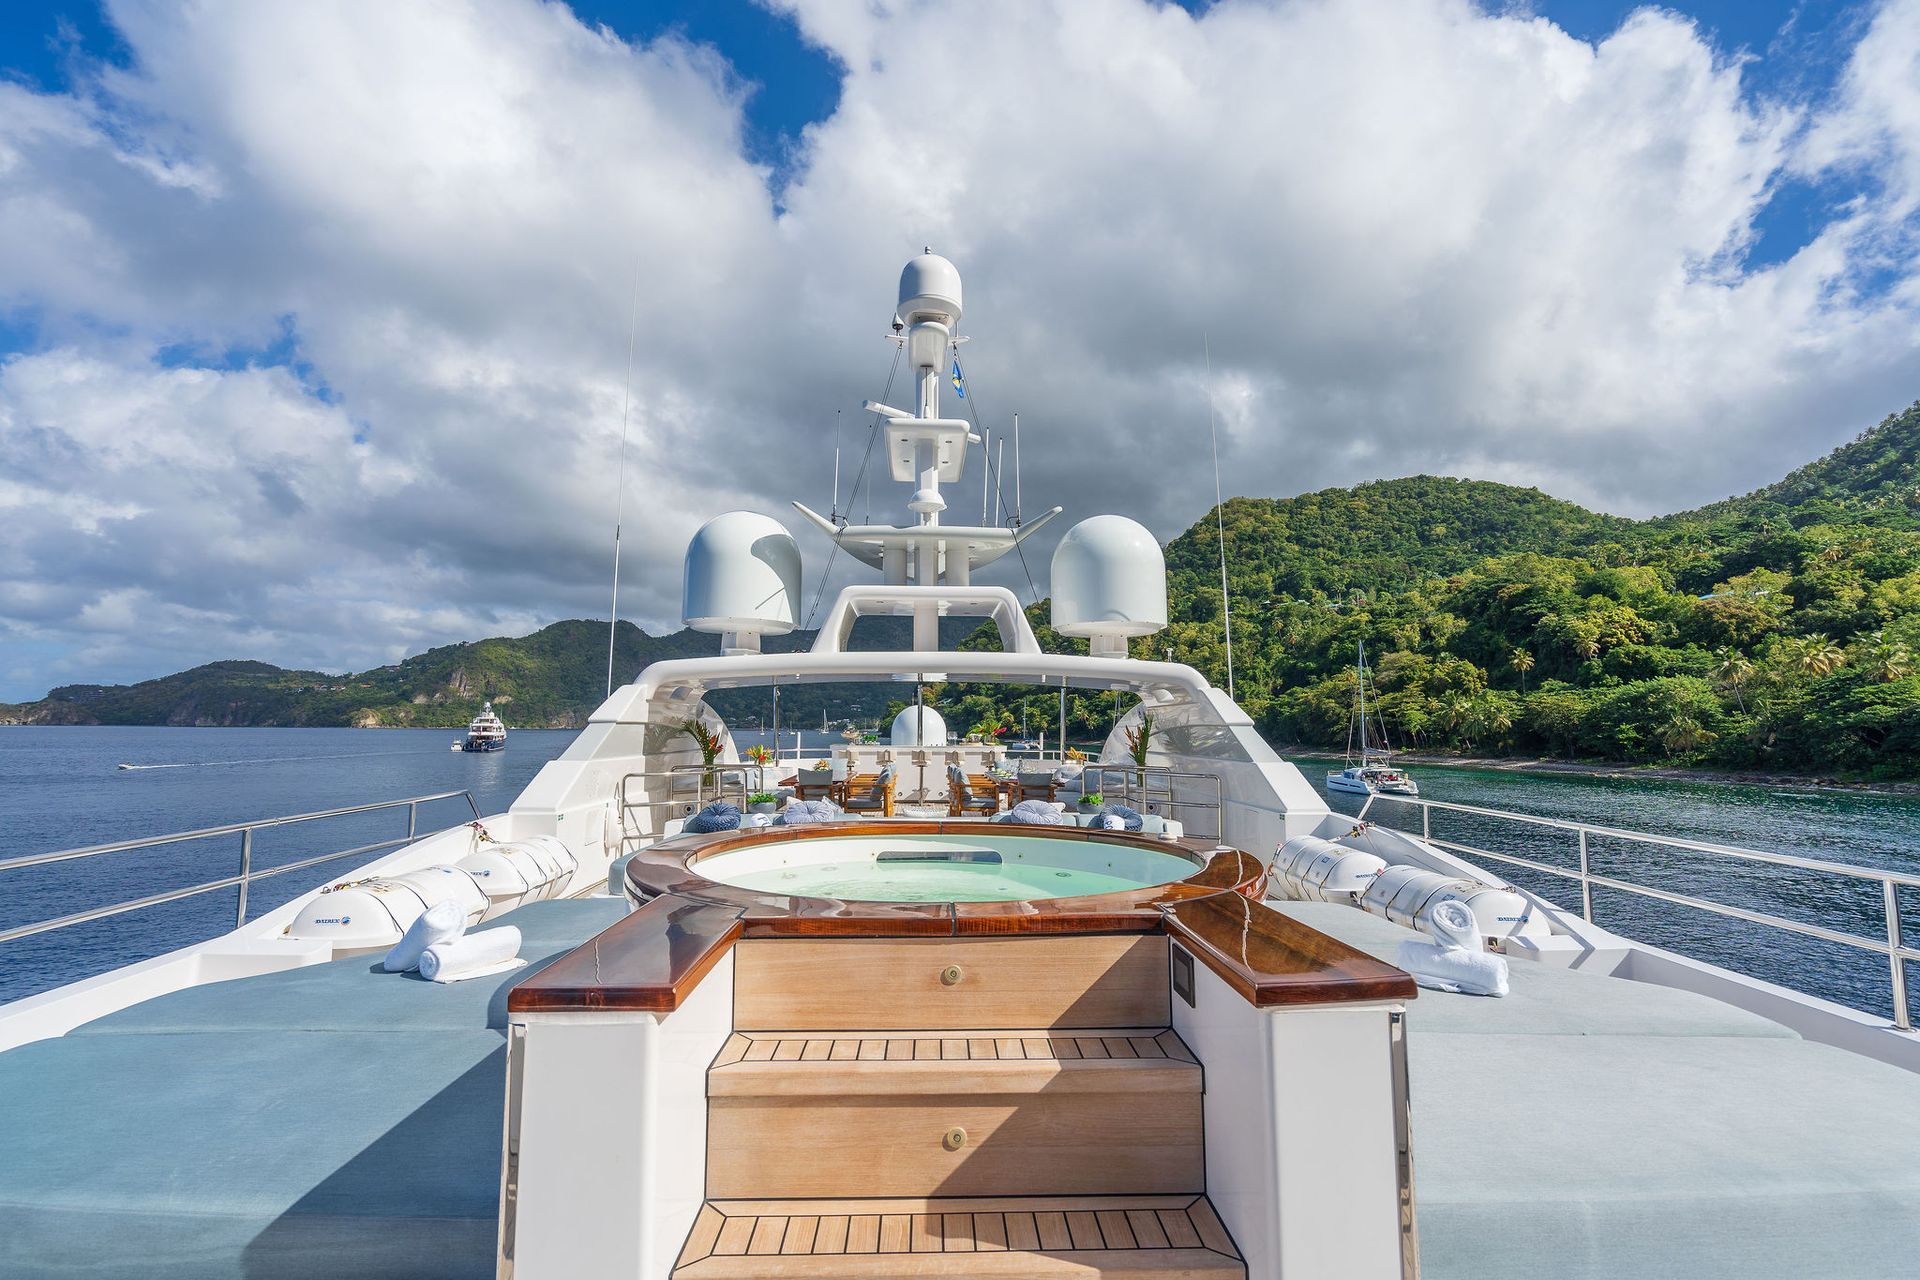 the front of a large yacht with a hot tub on the deck